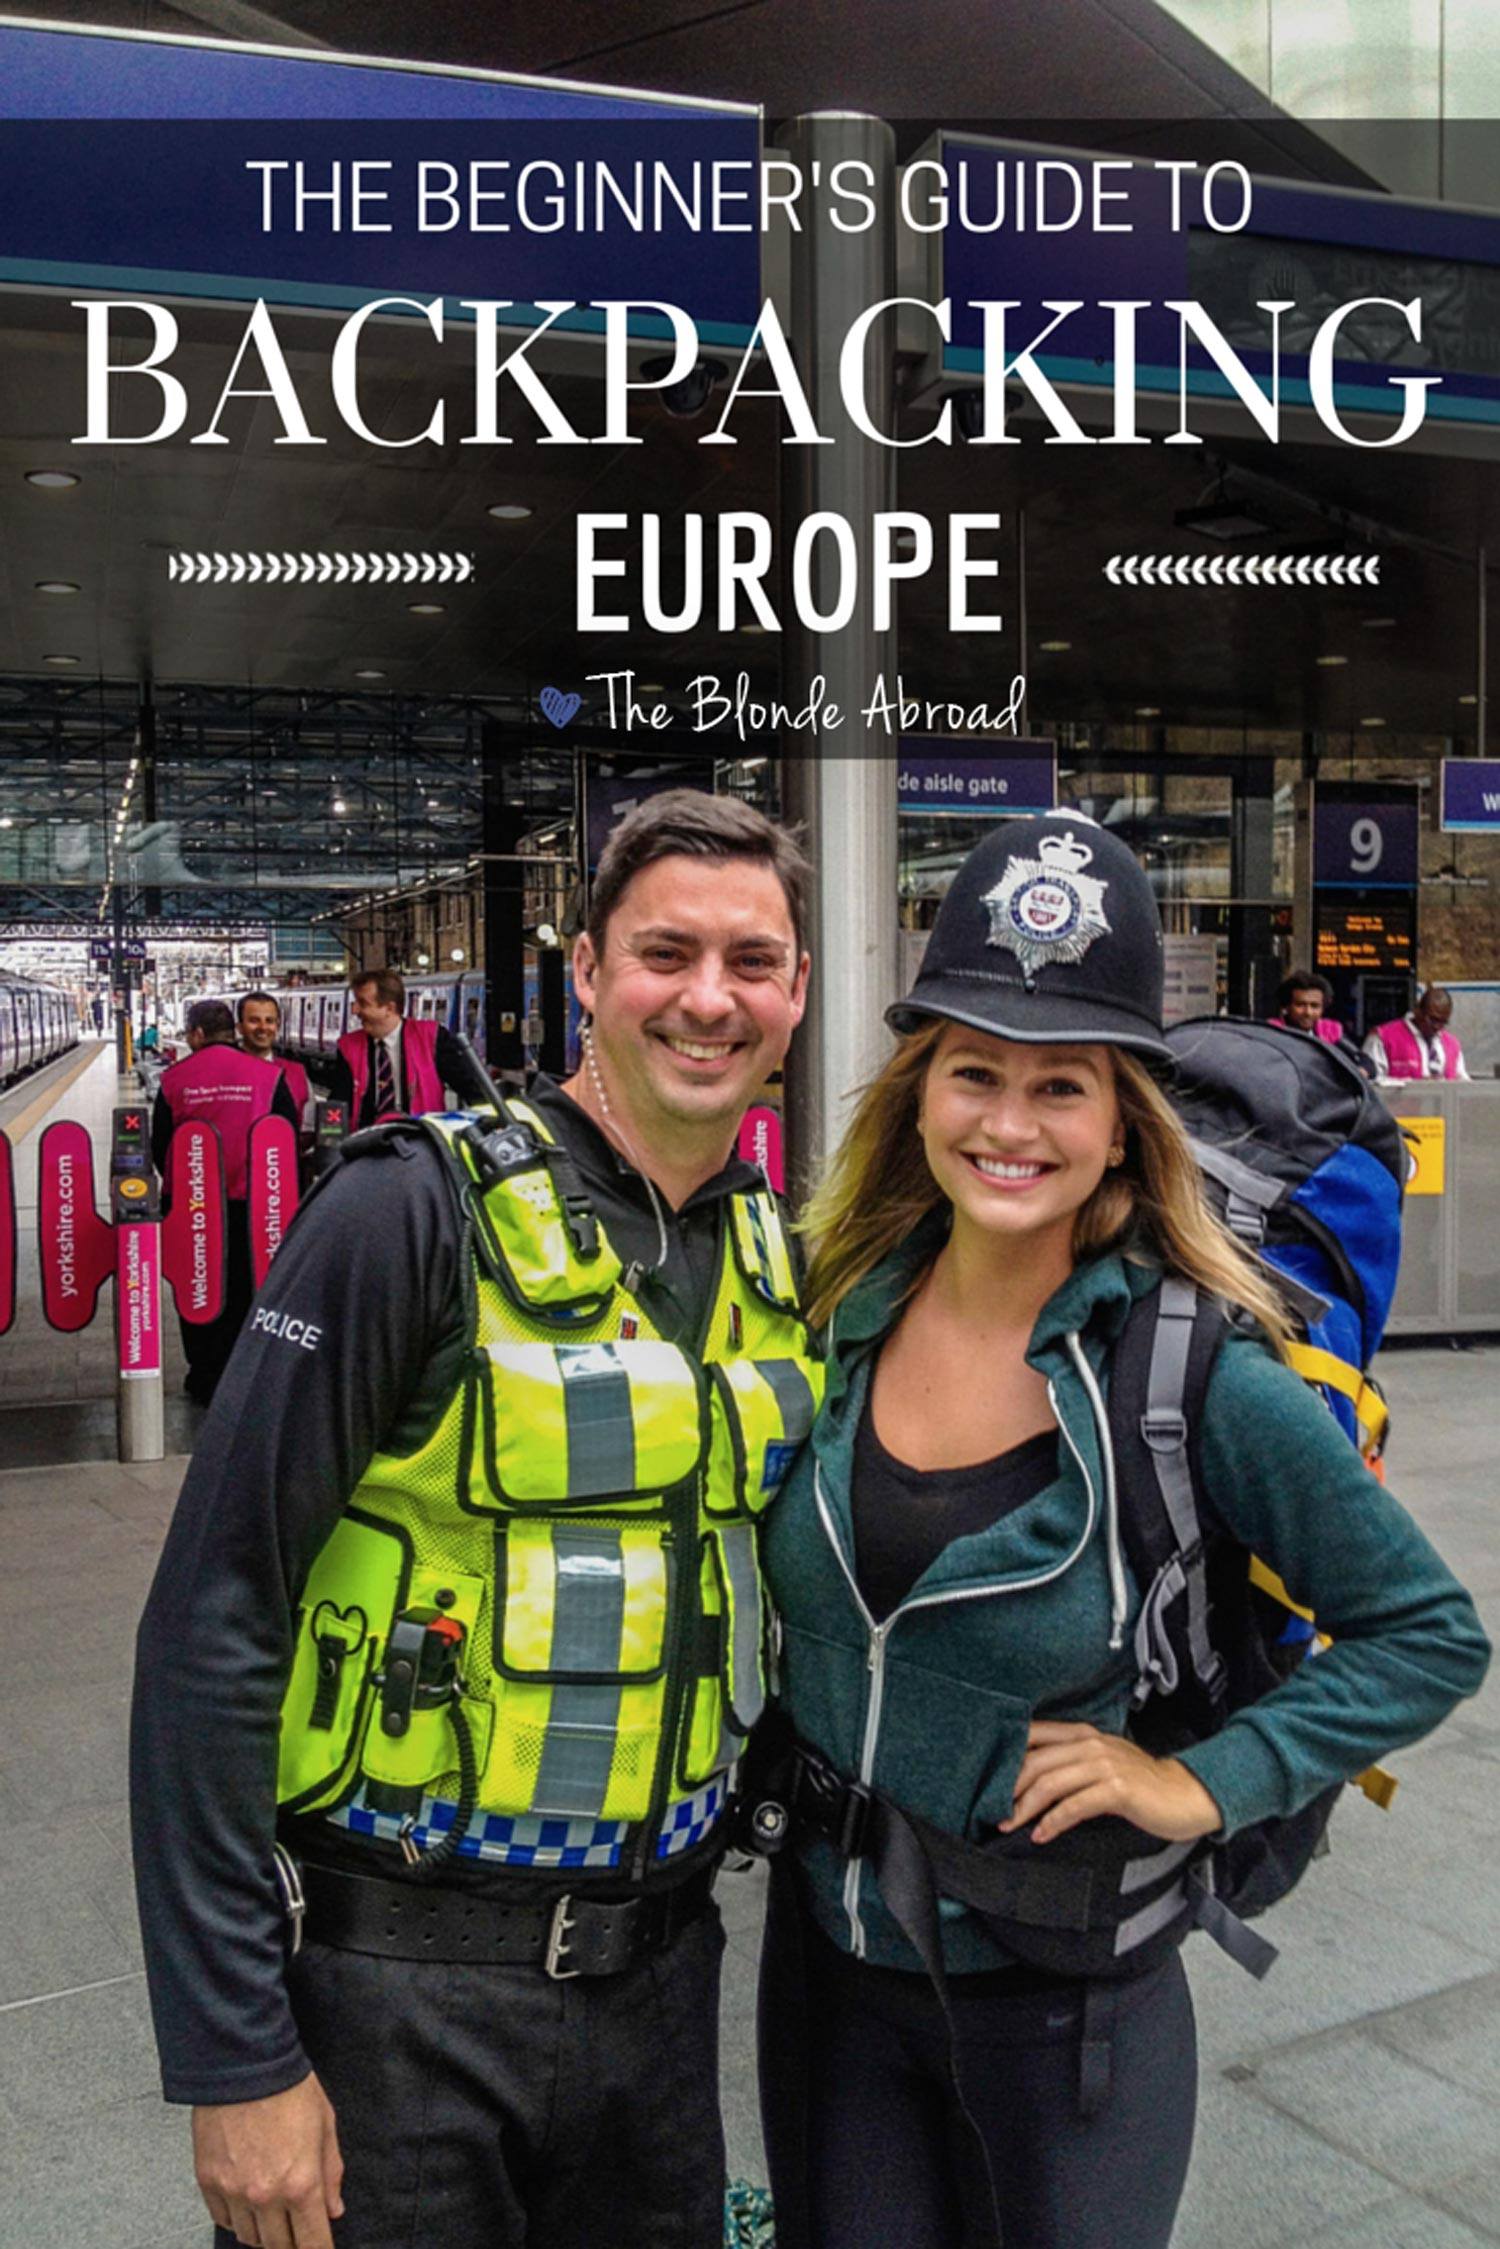 The Beginner's Guide to Backpacking Europe • The Blonde Abroad - Backpacking Europe 1